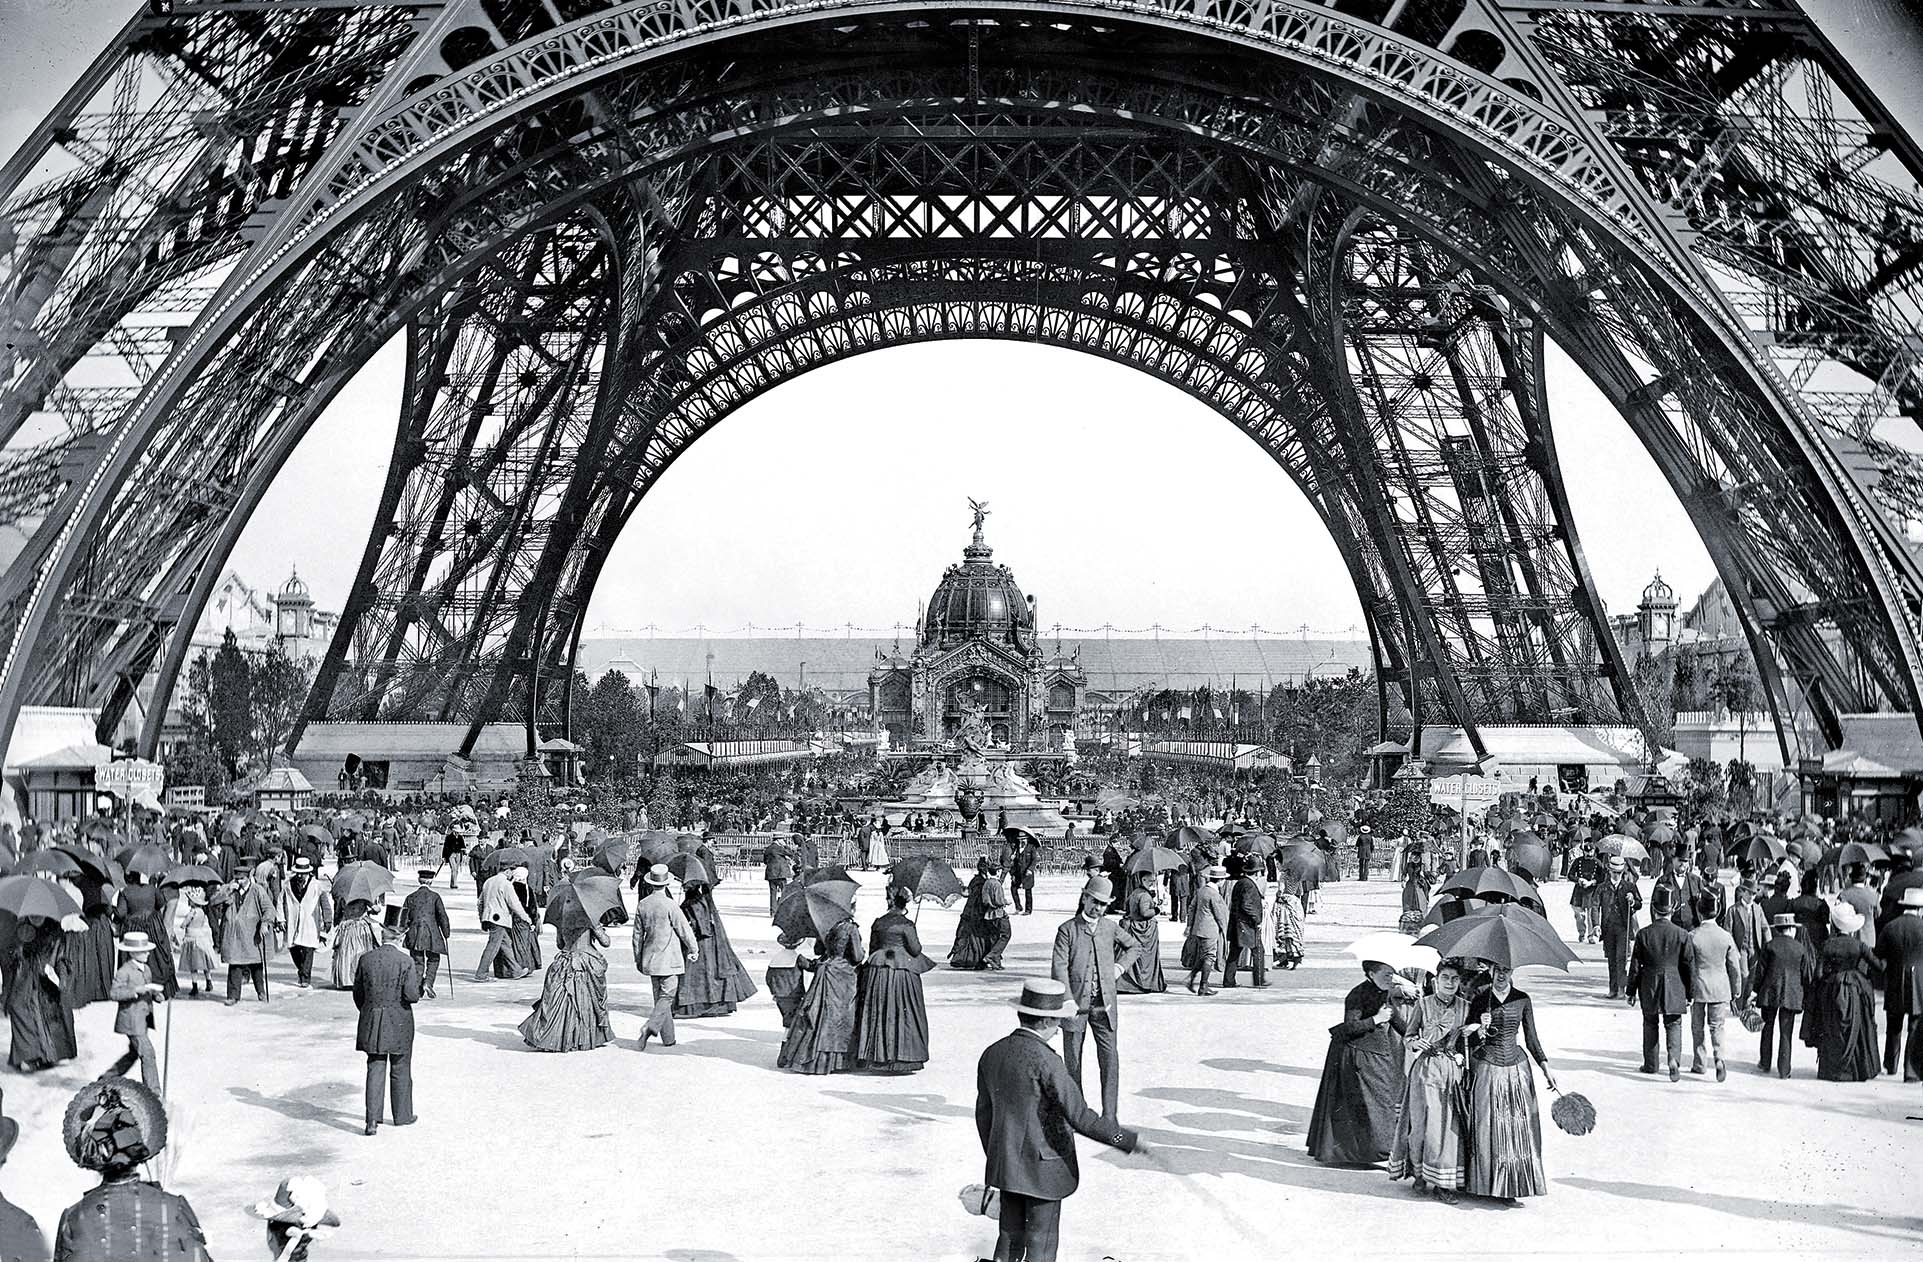 In the decades following the collapse of the Commune Paris regained its status as the “City of Light,” attracting American expats back to a rebuilt capital graced by Gustave Eiffel’s tower. / Getty Images